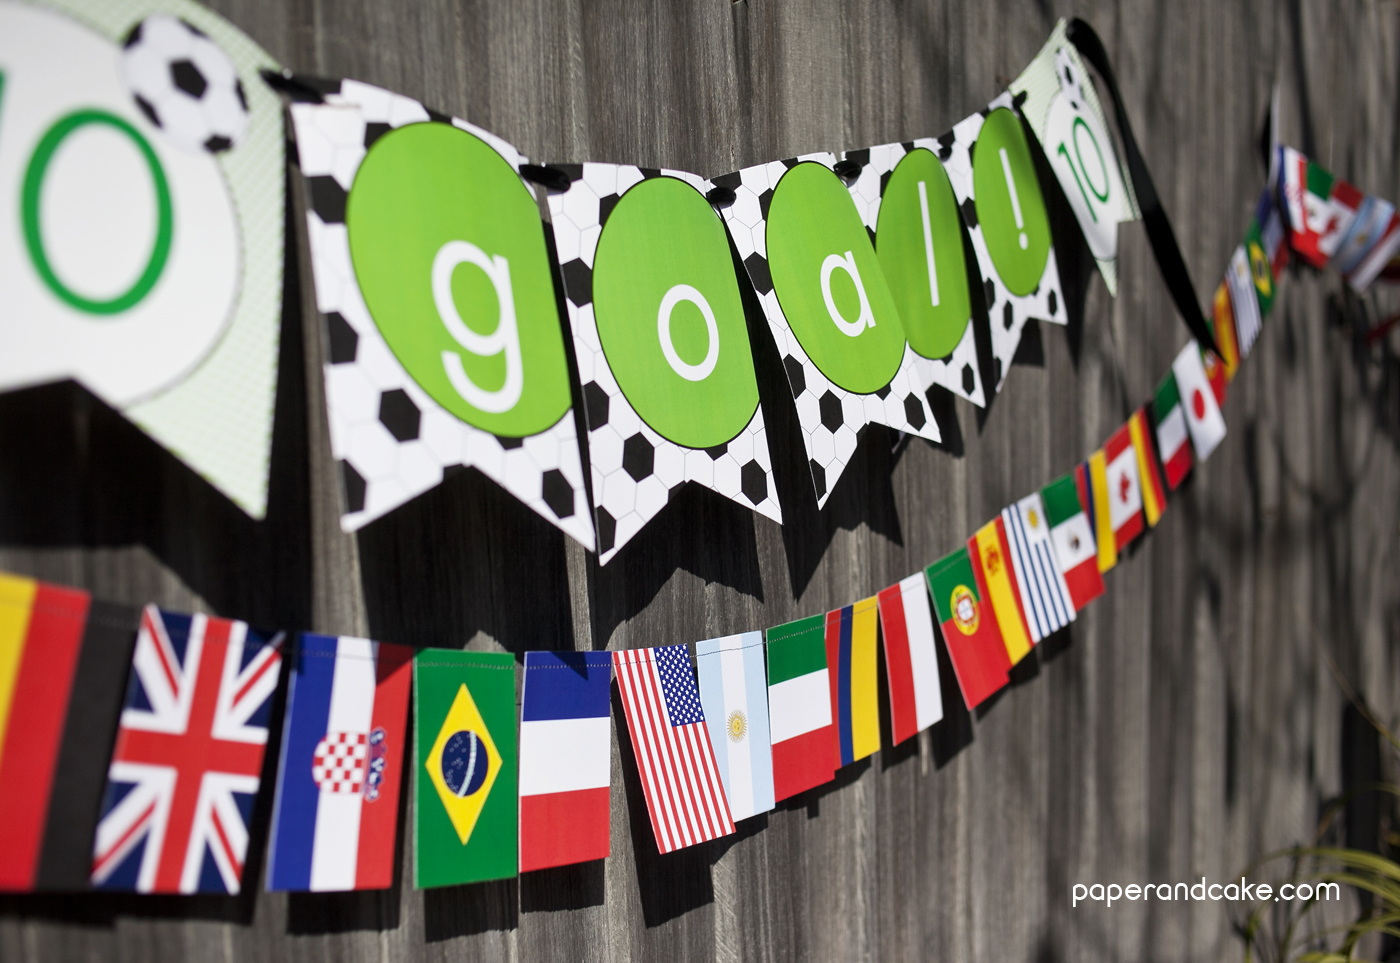 Soccer Printable Birthday Party - Paper and Cake Paper and Cake1400 x 963